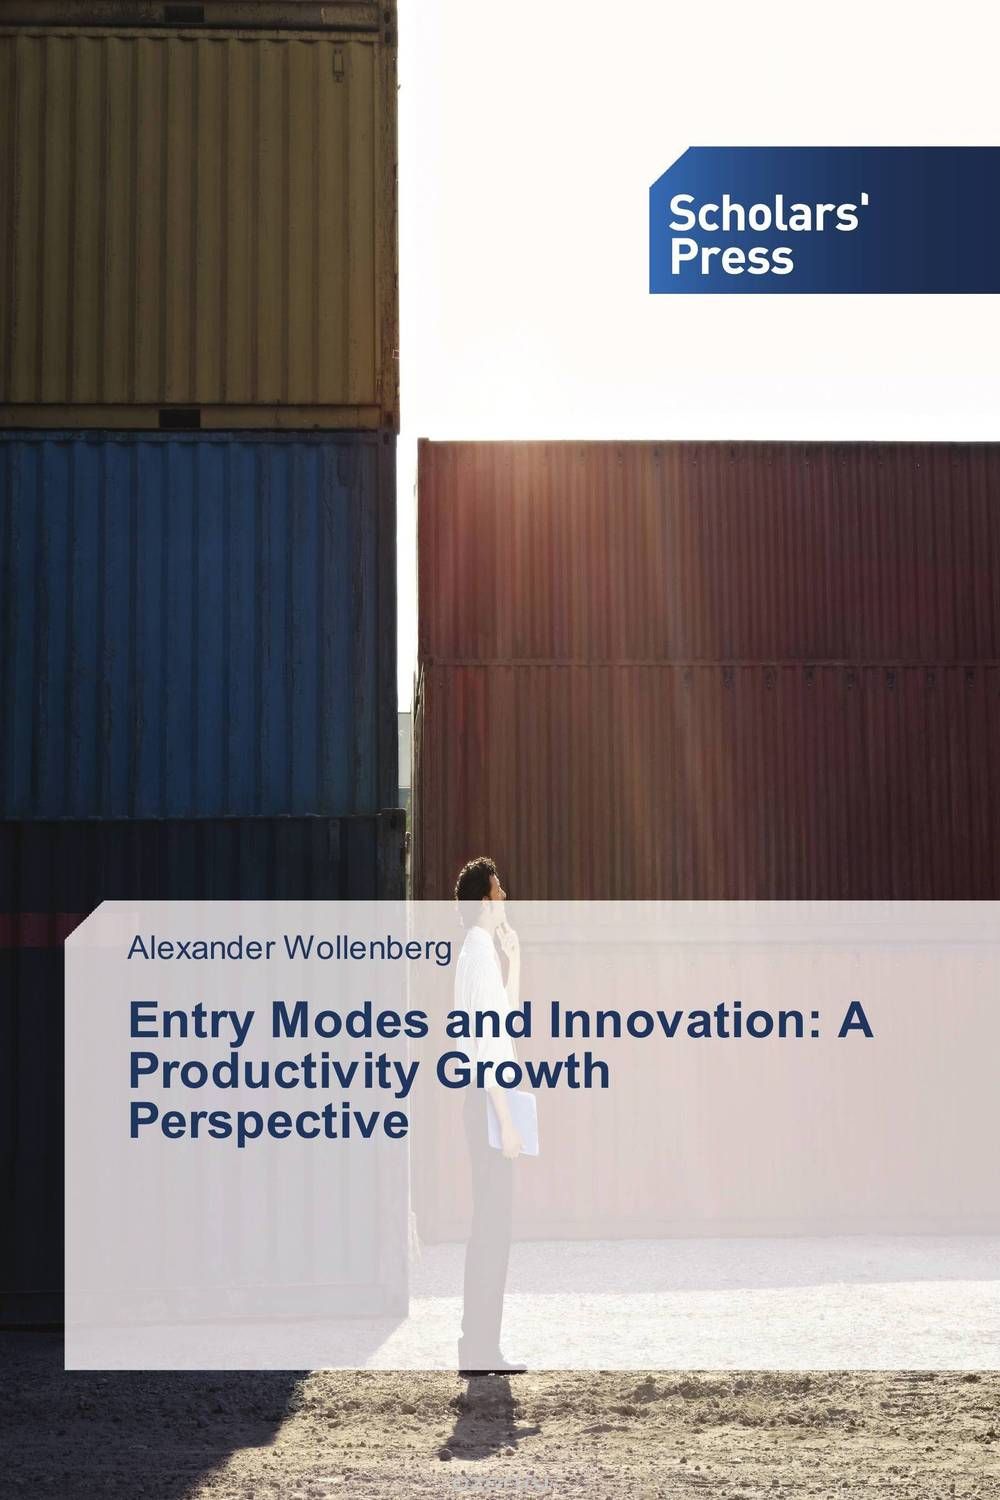 Скачать книгу "Entry Modes and Innovation: A Productivity Growth Perspective"